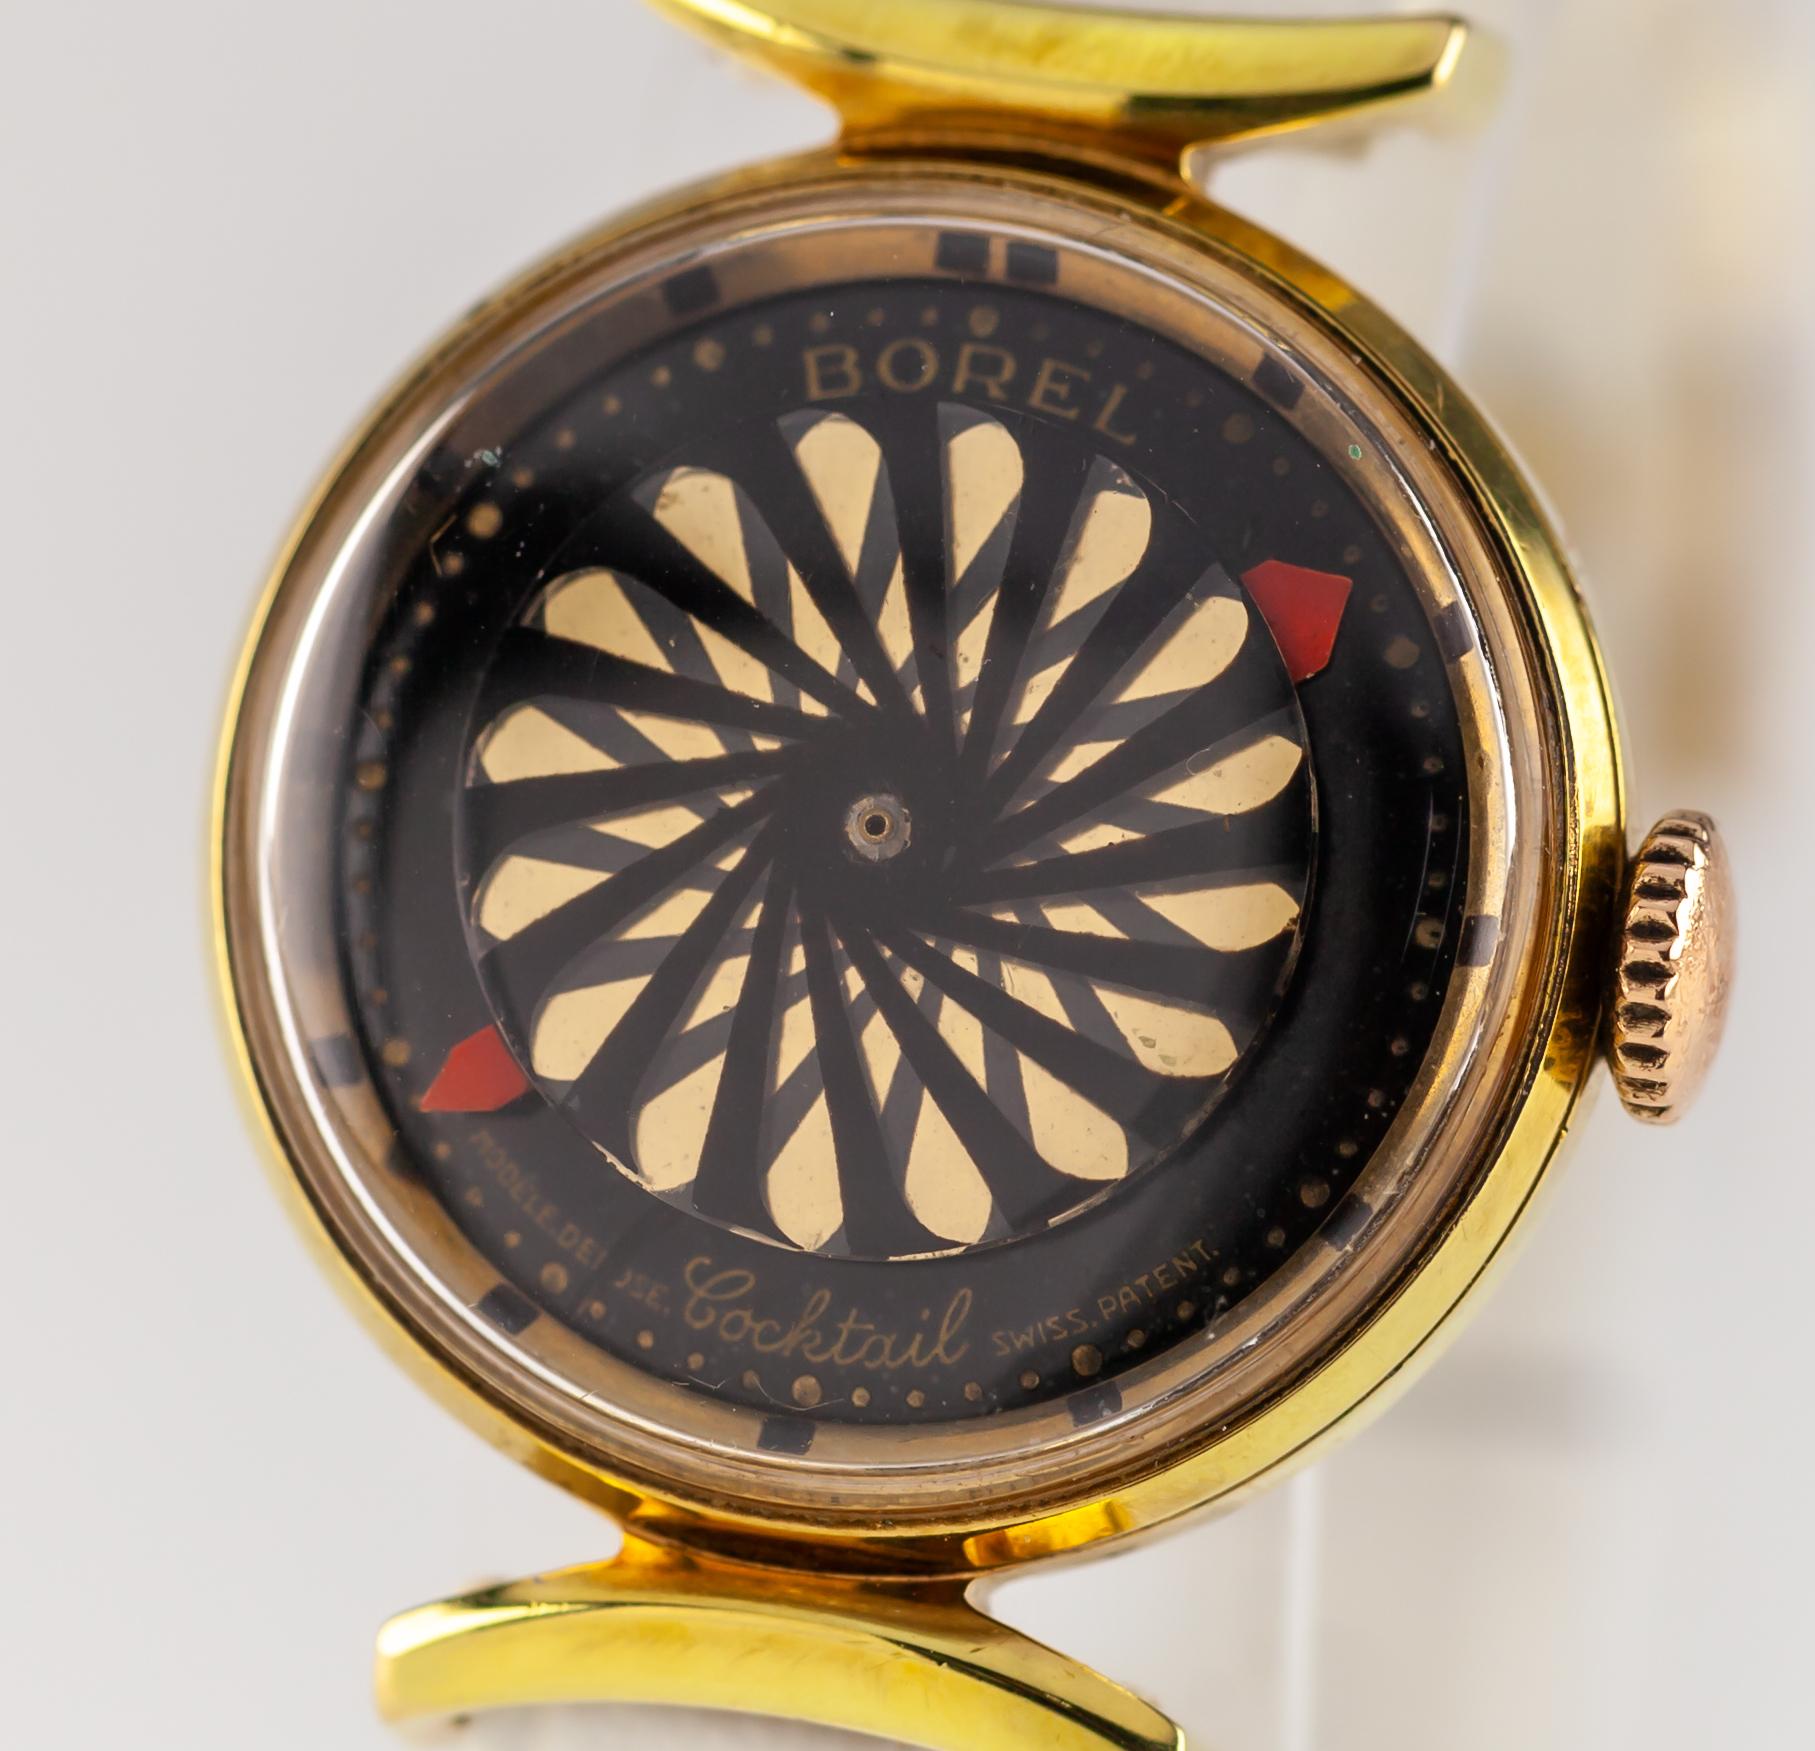 
Ernest Borel Gold-Plated Women's Kaleidoscope Watch w/ New White Leather Band
Case #Borel 26
Gold-Plated Round Case
25 mm in Diameter (27 mm w/ Crown)
Lug-to-Lug Distance = 32 mm
Lug-to-Lug Width = 13 mm
Thickness = 10 mm
Black Kaleidoscope Dial w/